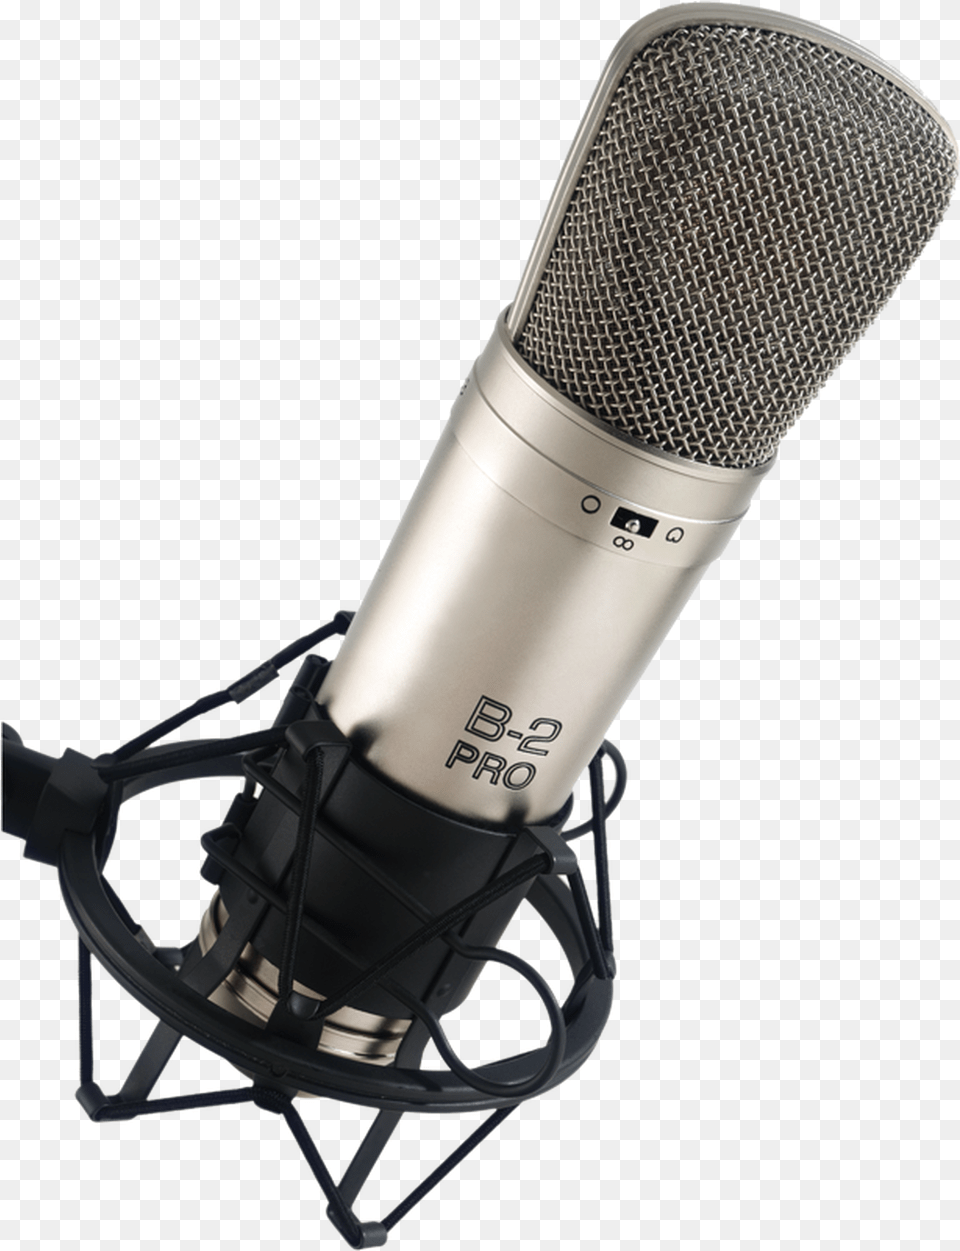 Behringer B2pro Dual Dia Studio Condenser Microphone Behringer B2 Pro, Electrical Device Png Image